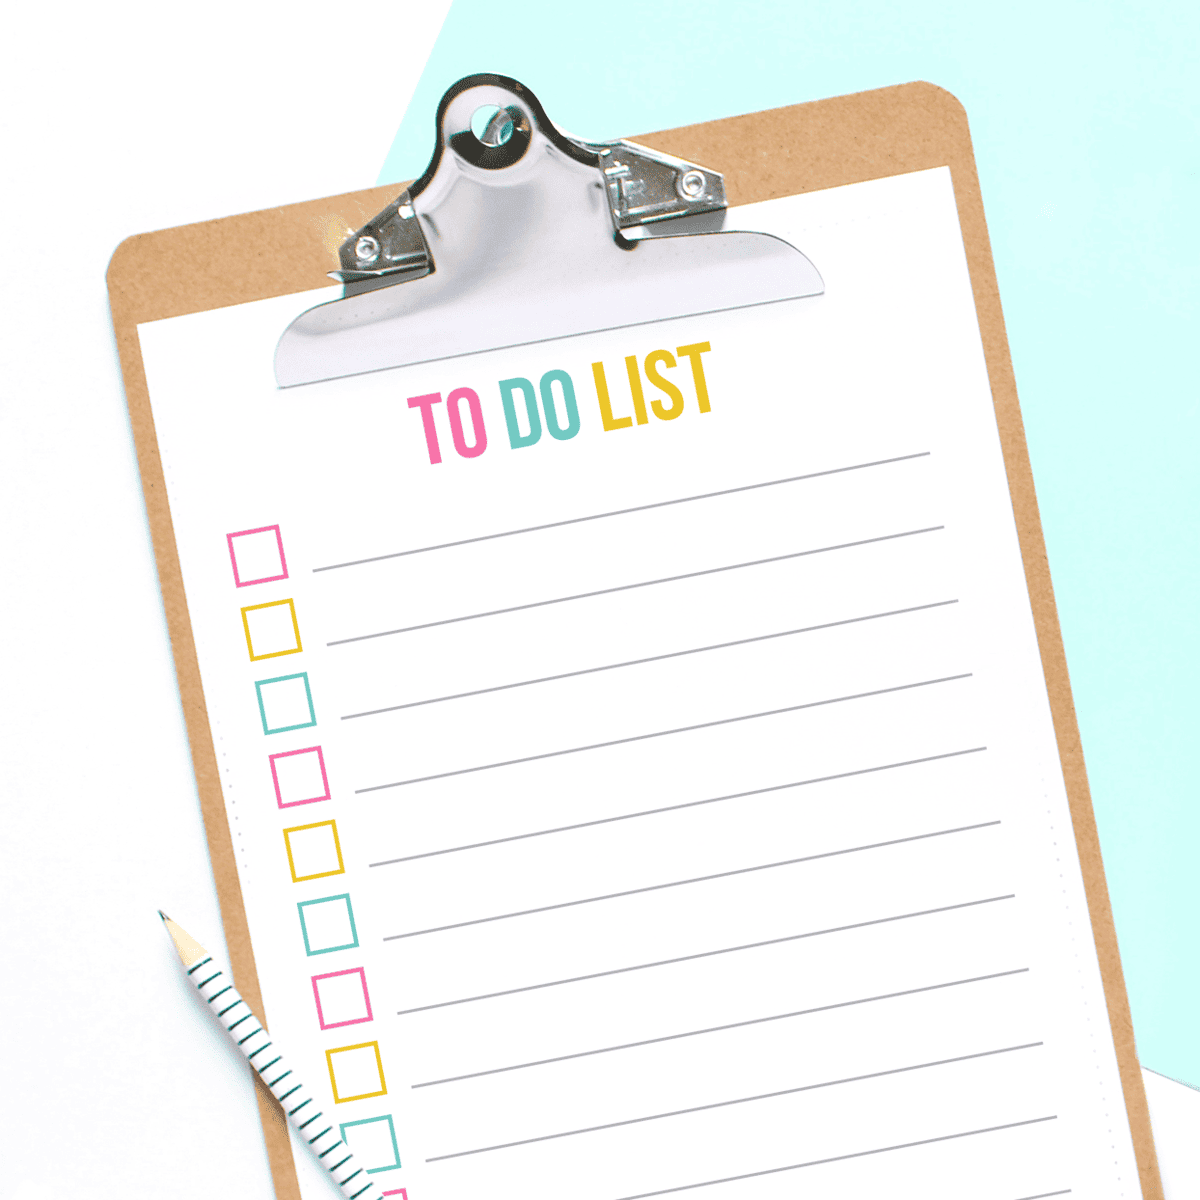 Free Printable To Do List - A Colorful PDF Download